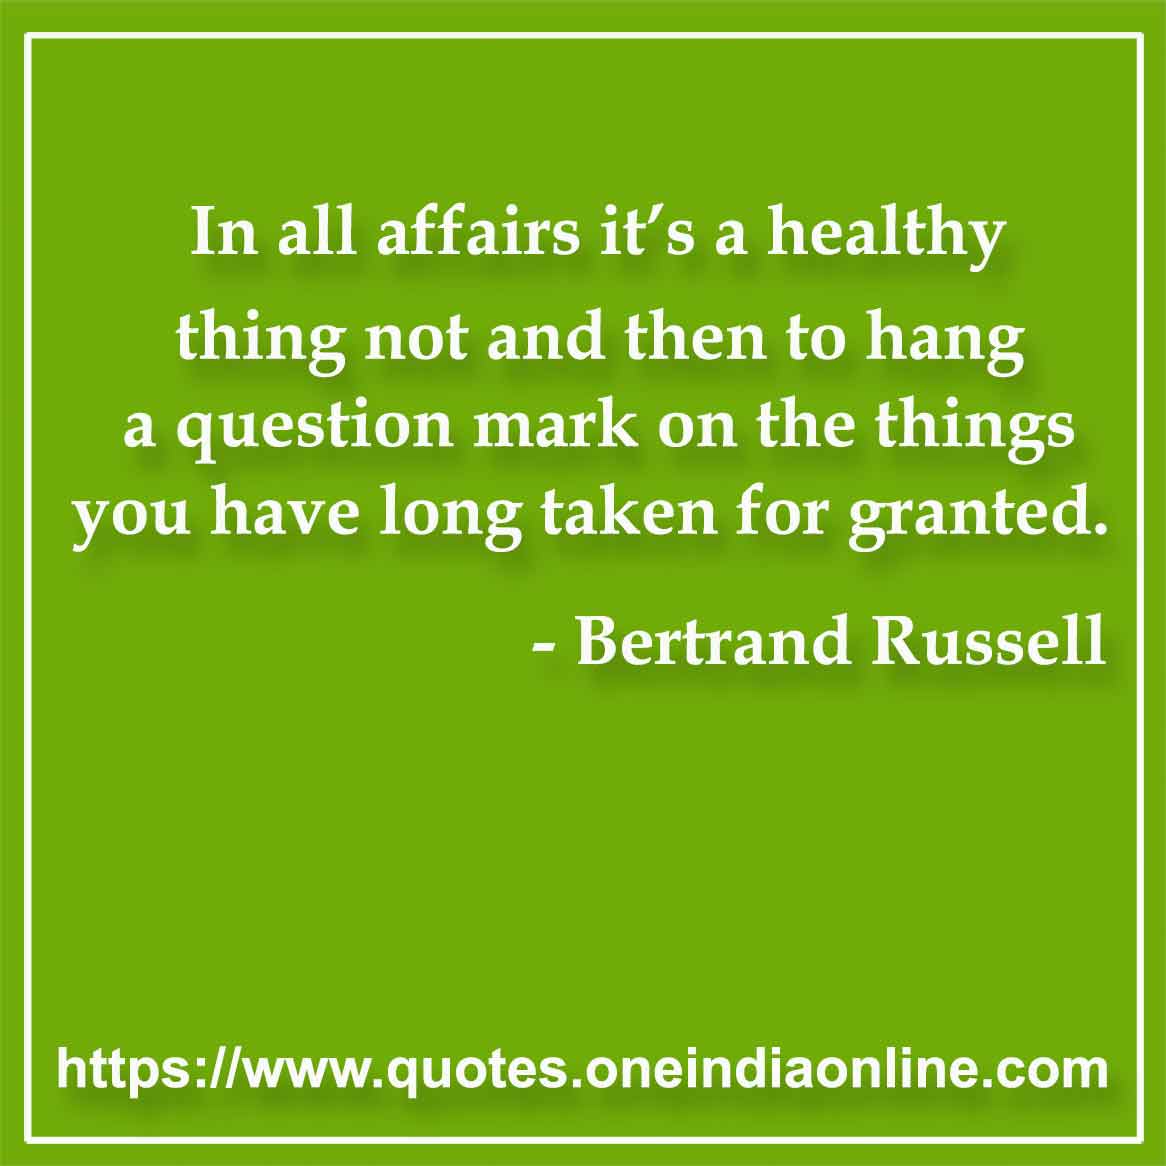 In all affairs it’s a healthy thing not and then to hang a question mark on the things you have long taken for granted.

- Question Quotes by Bertrand Russell